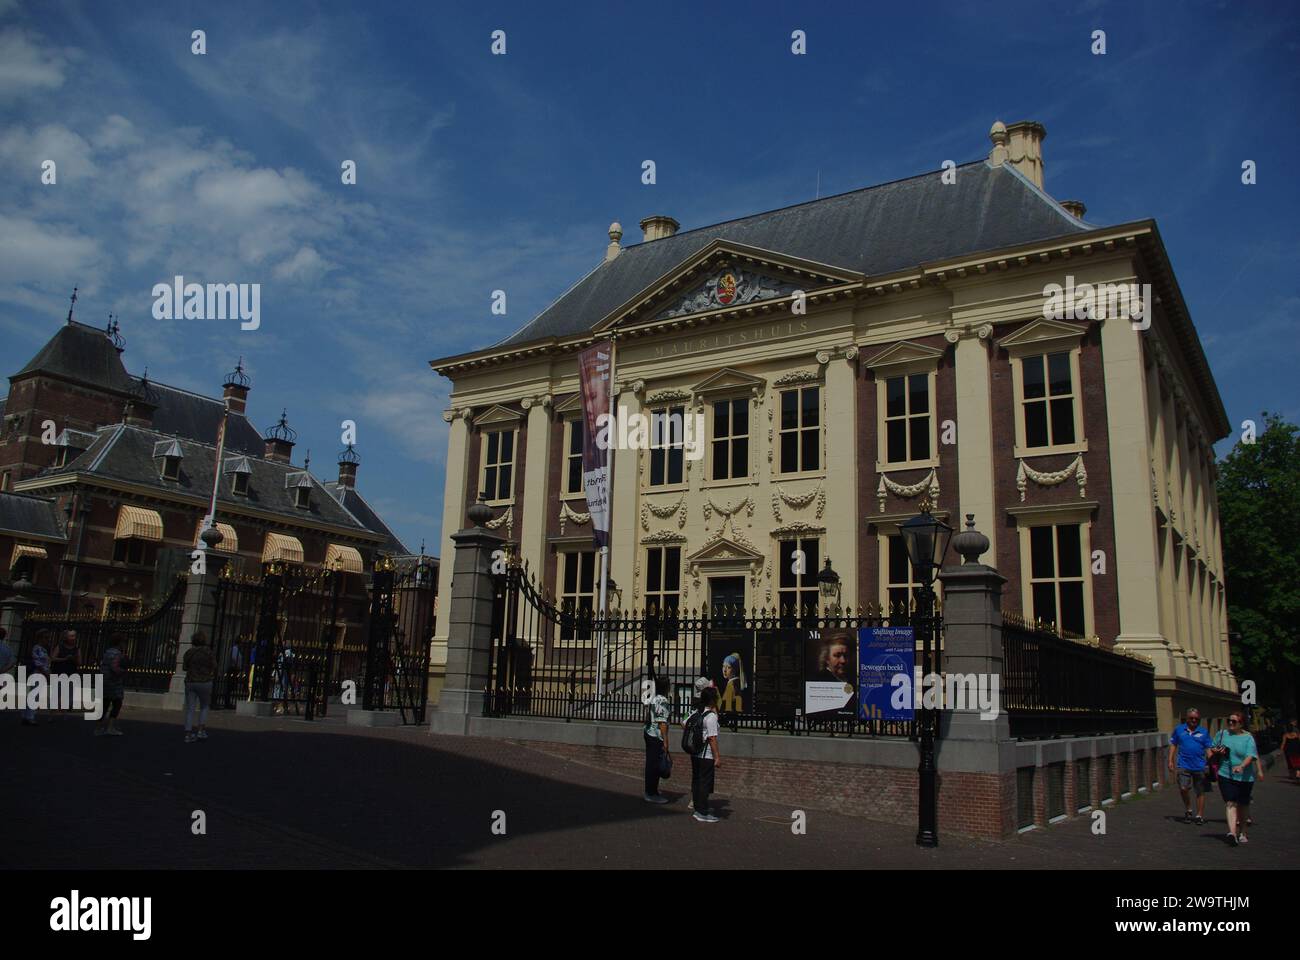 The Mauritshuis art gallery housing Vermeer's 'Girl with a Pearl Earring' at The Hague, Netherlands Stock Photo